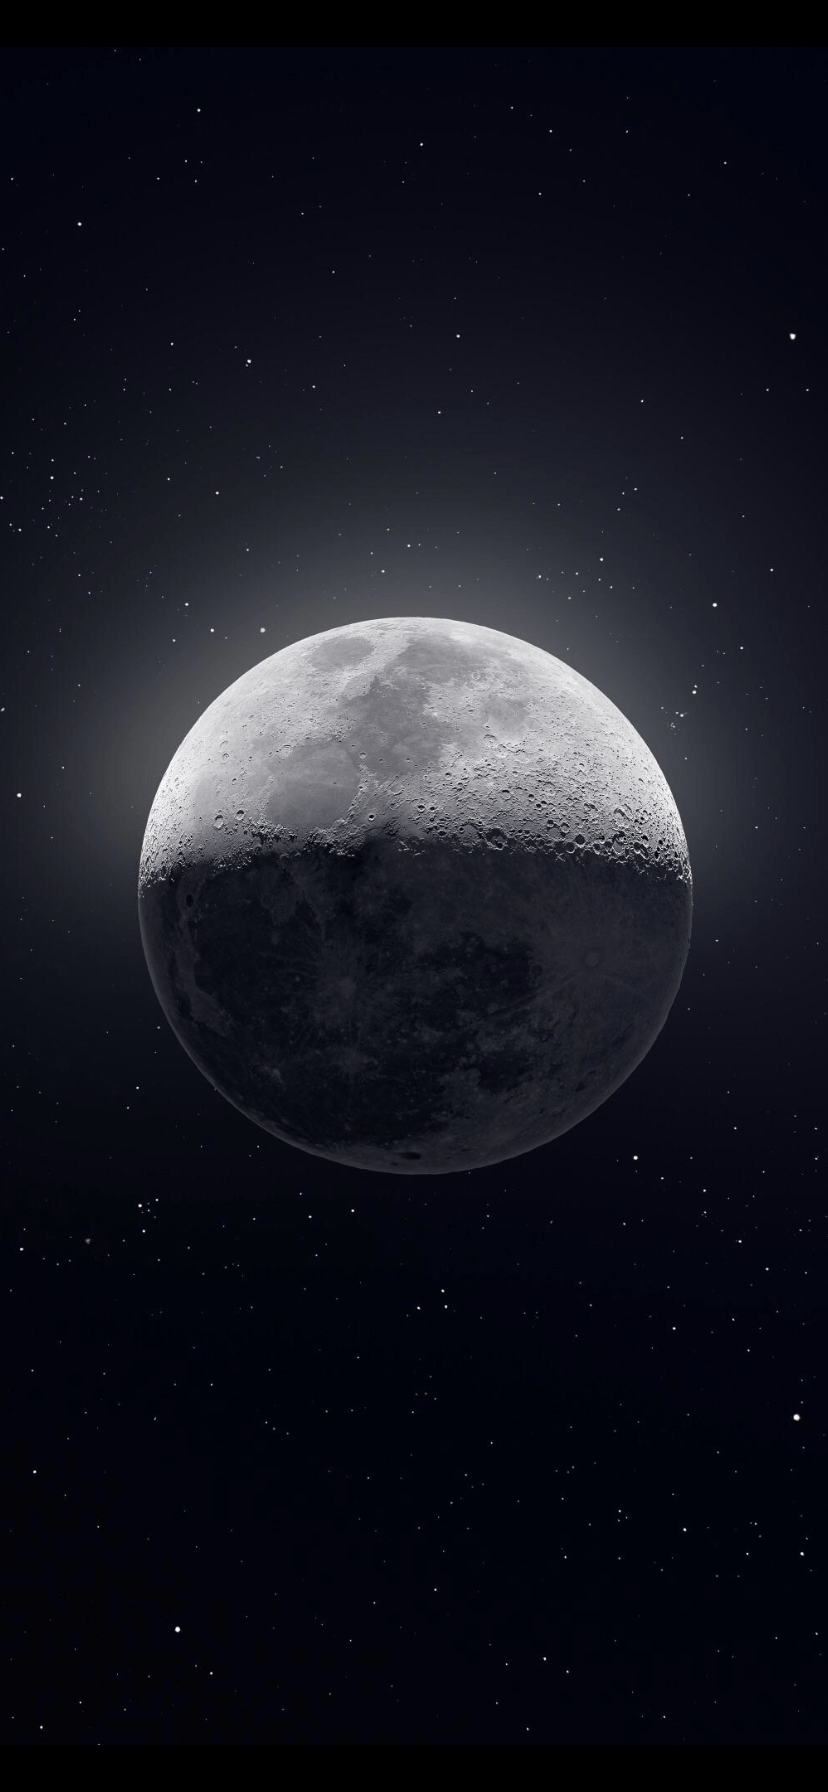 Awesome moon photo scaled to iPhone XR wallpapers